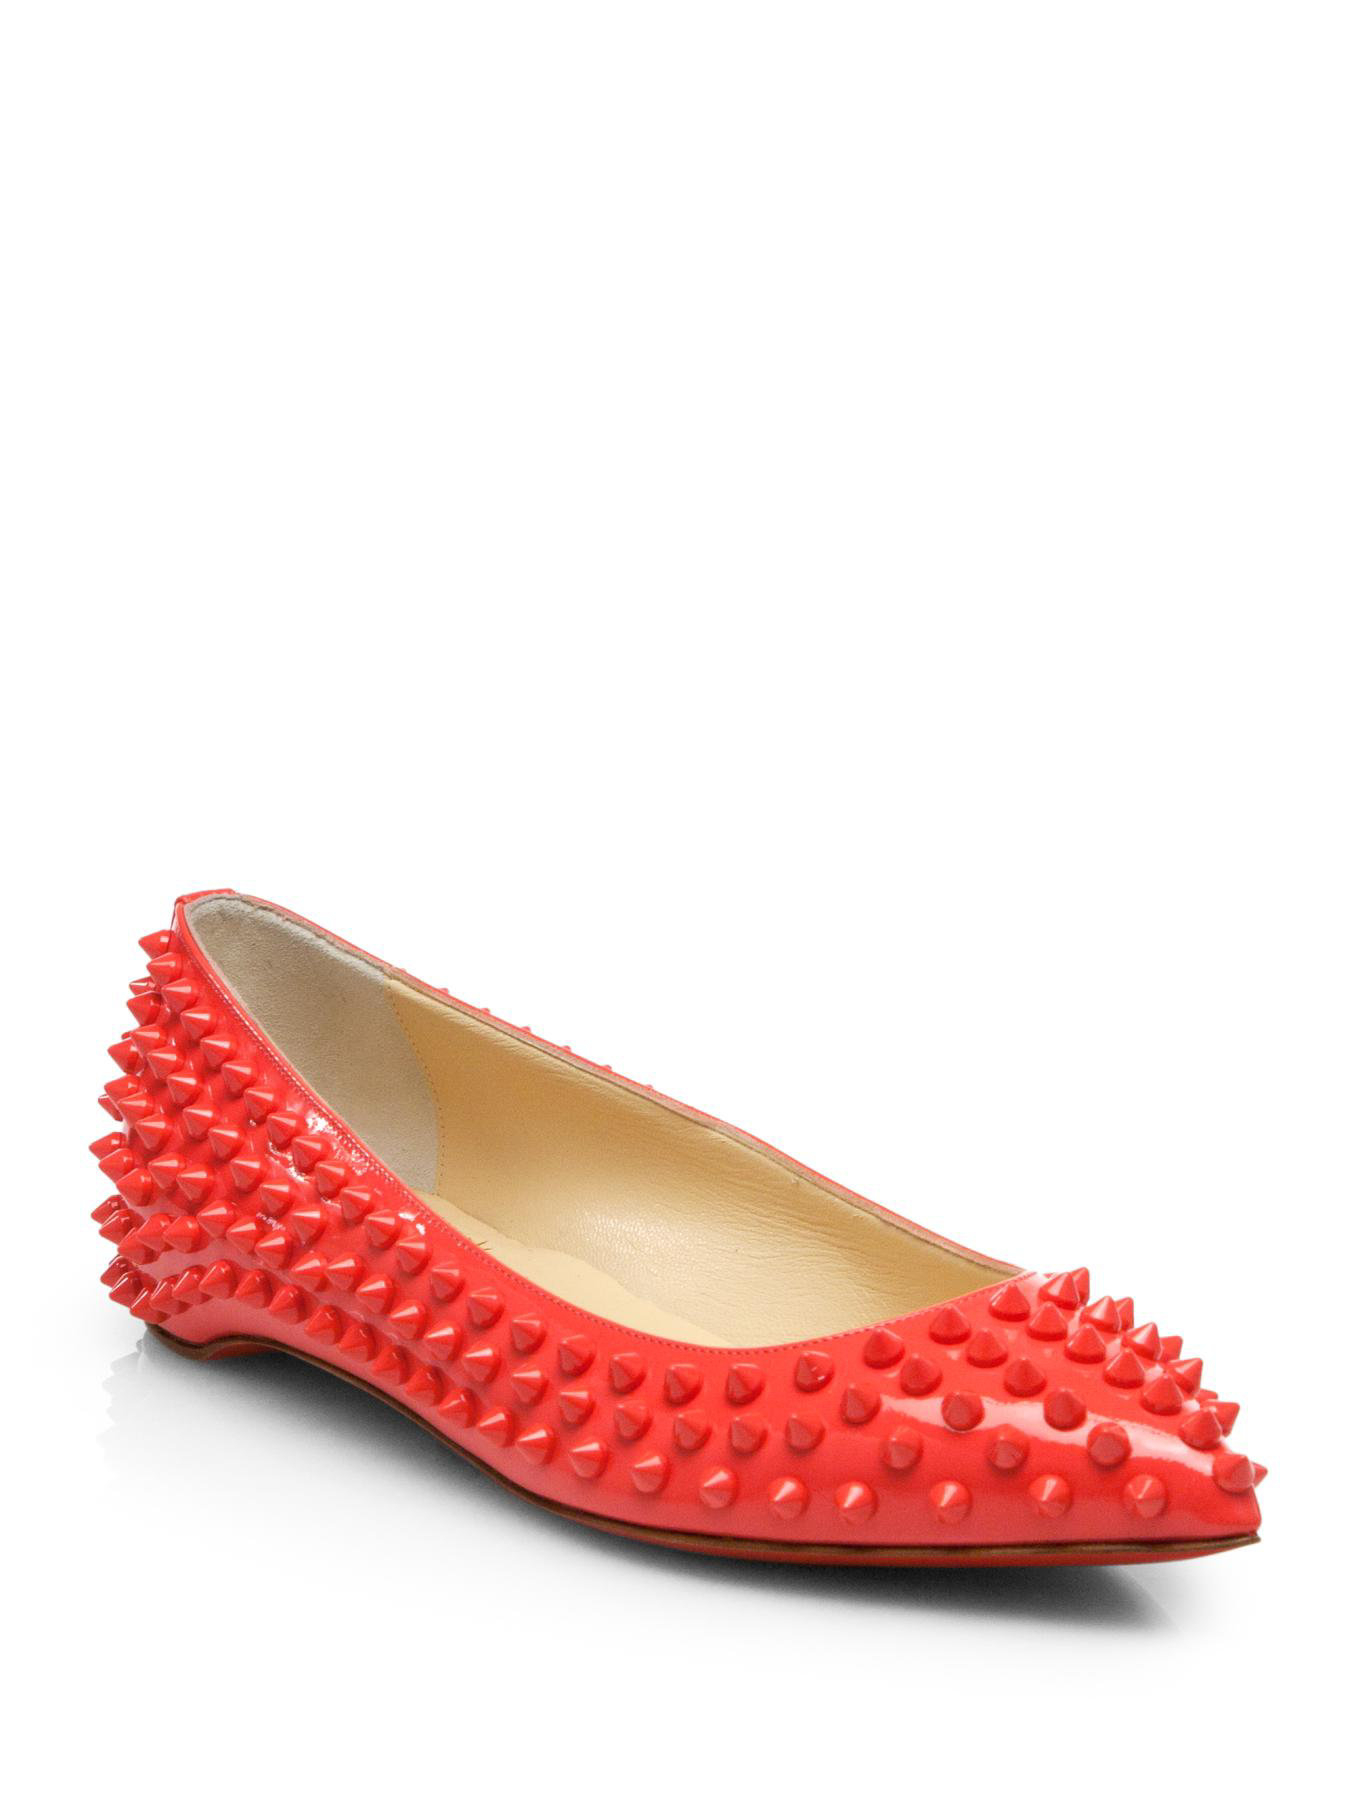 Lyst - Christian Louboutin Pigalle Spiked Patent Leather Flats in Red